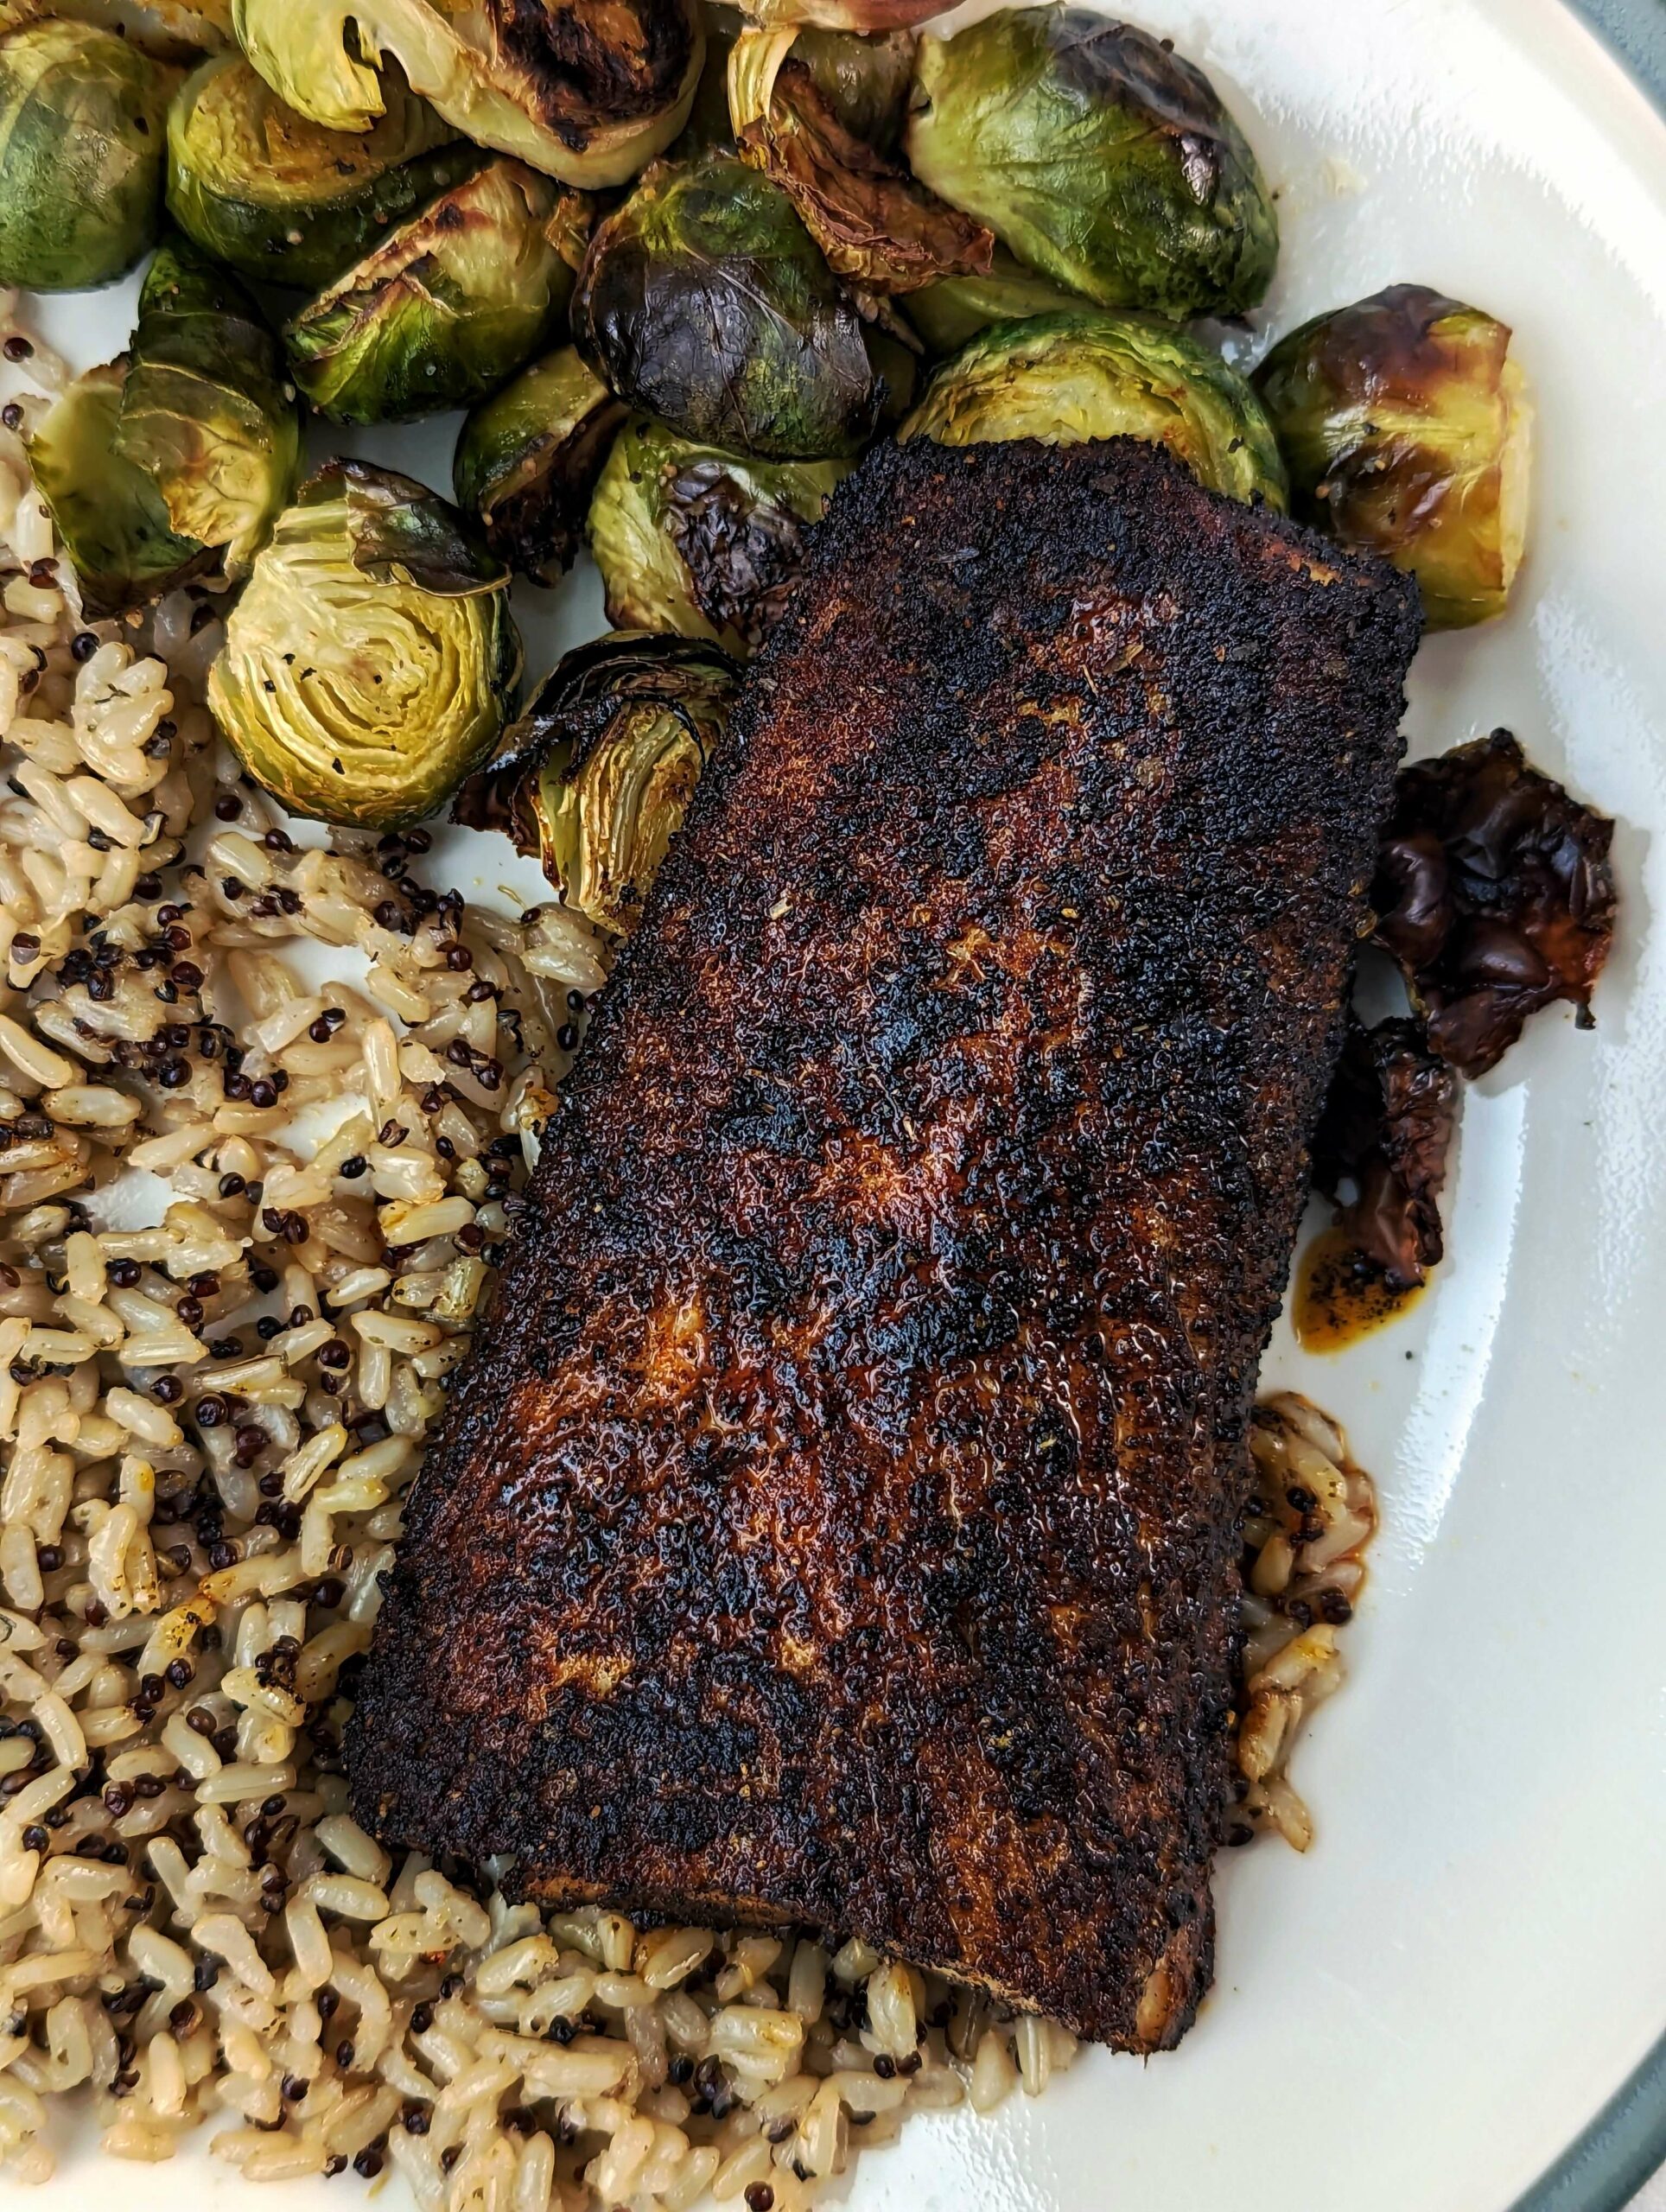 A mahi mahi fillet served with brussel sprouts and rice pilaf. 